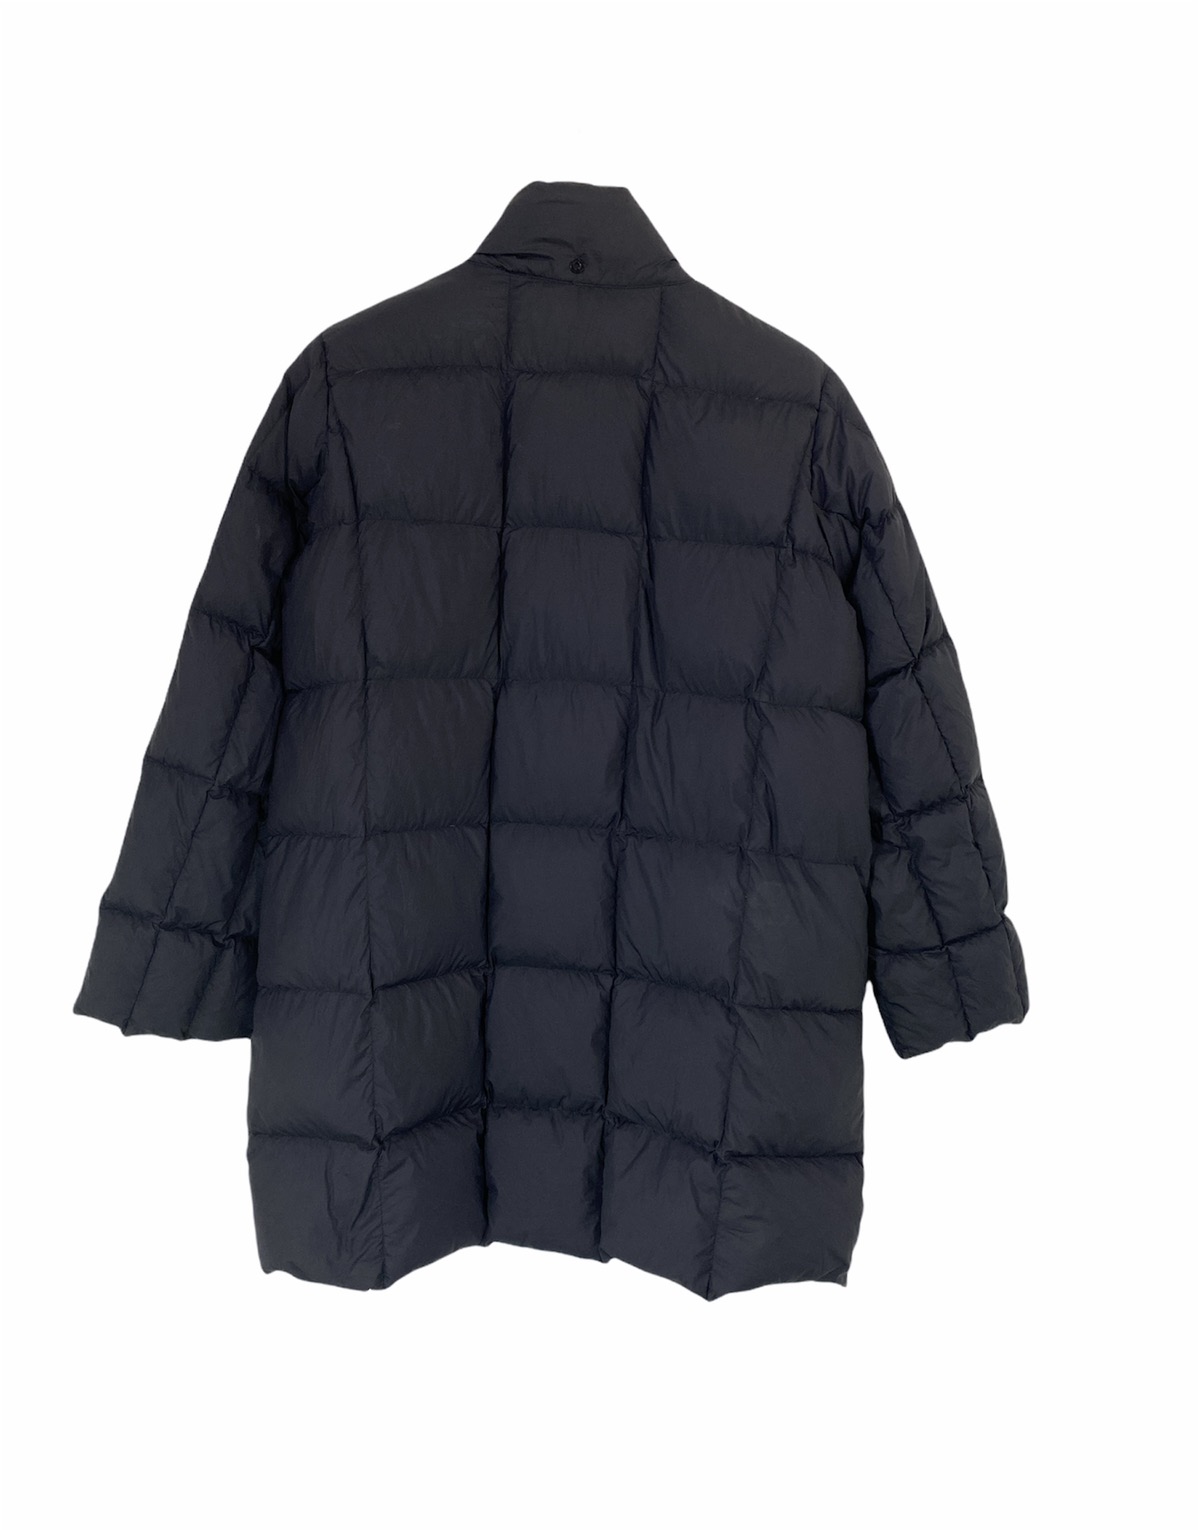 Lemaire X Uniqlo Long Puffer Quilted Jacket Black Colour - 2